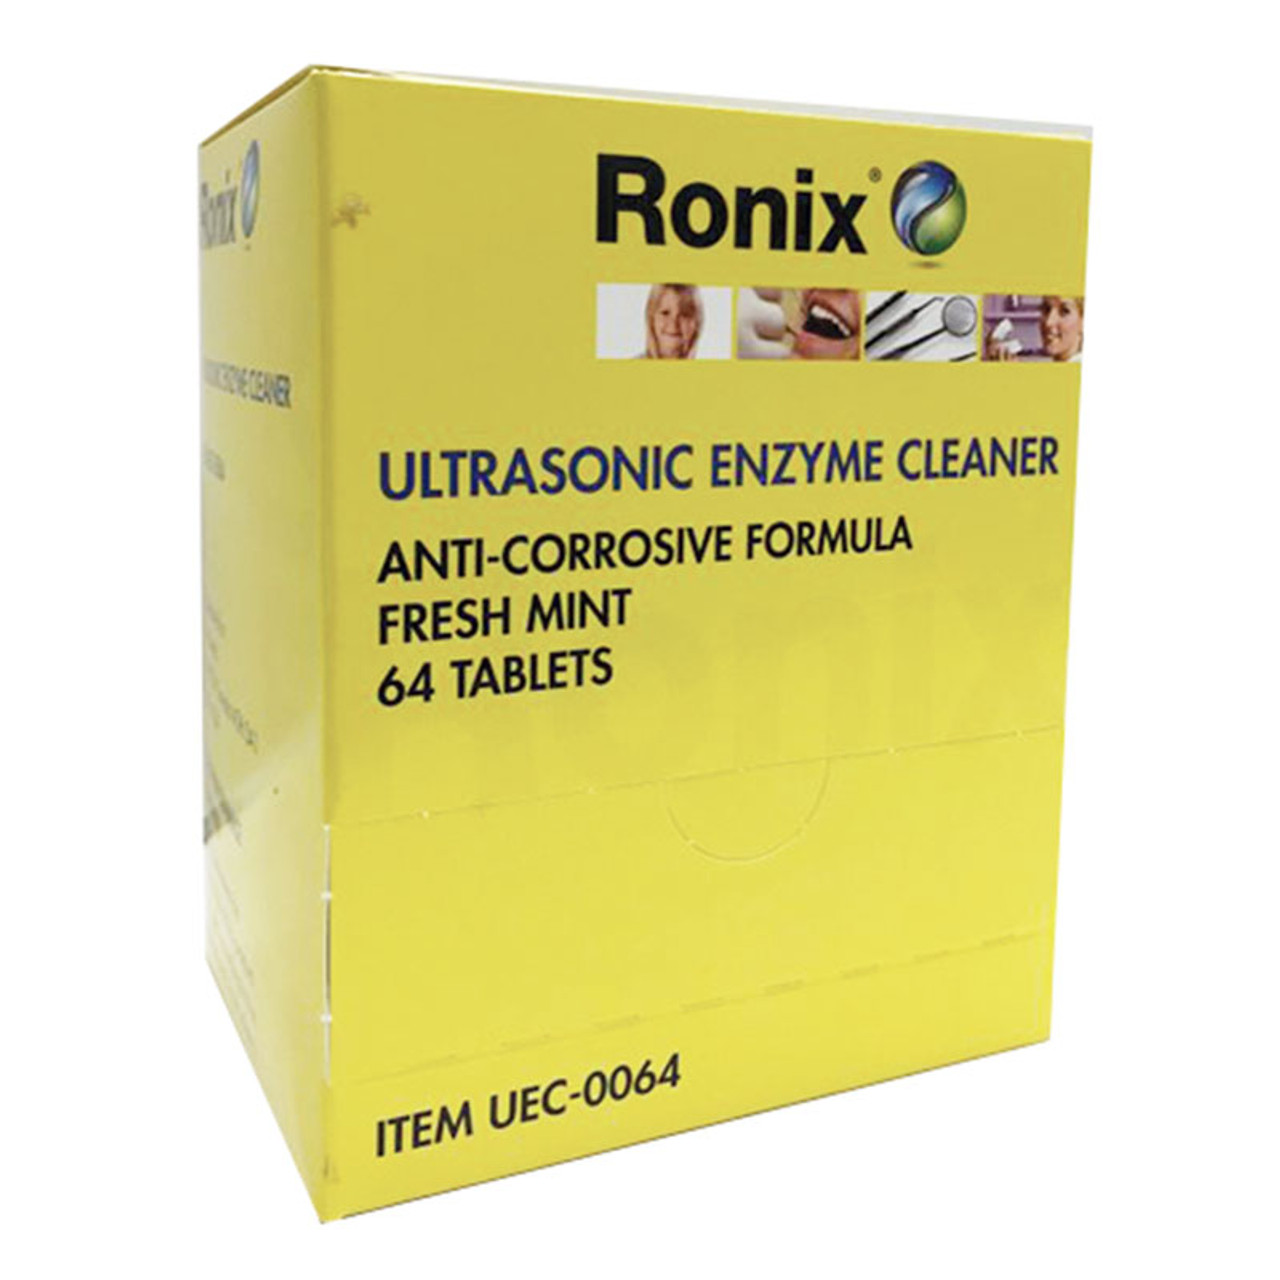 ULTRASONIC ENZYME CLEANER Bx-64   (Ronix) #UEC-0064